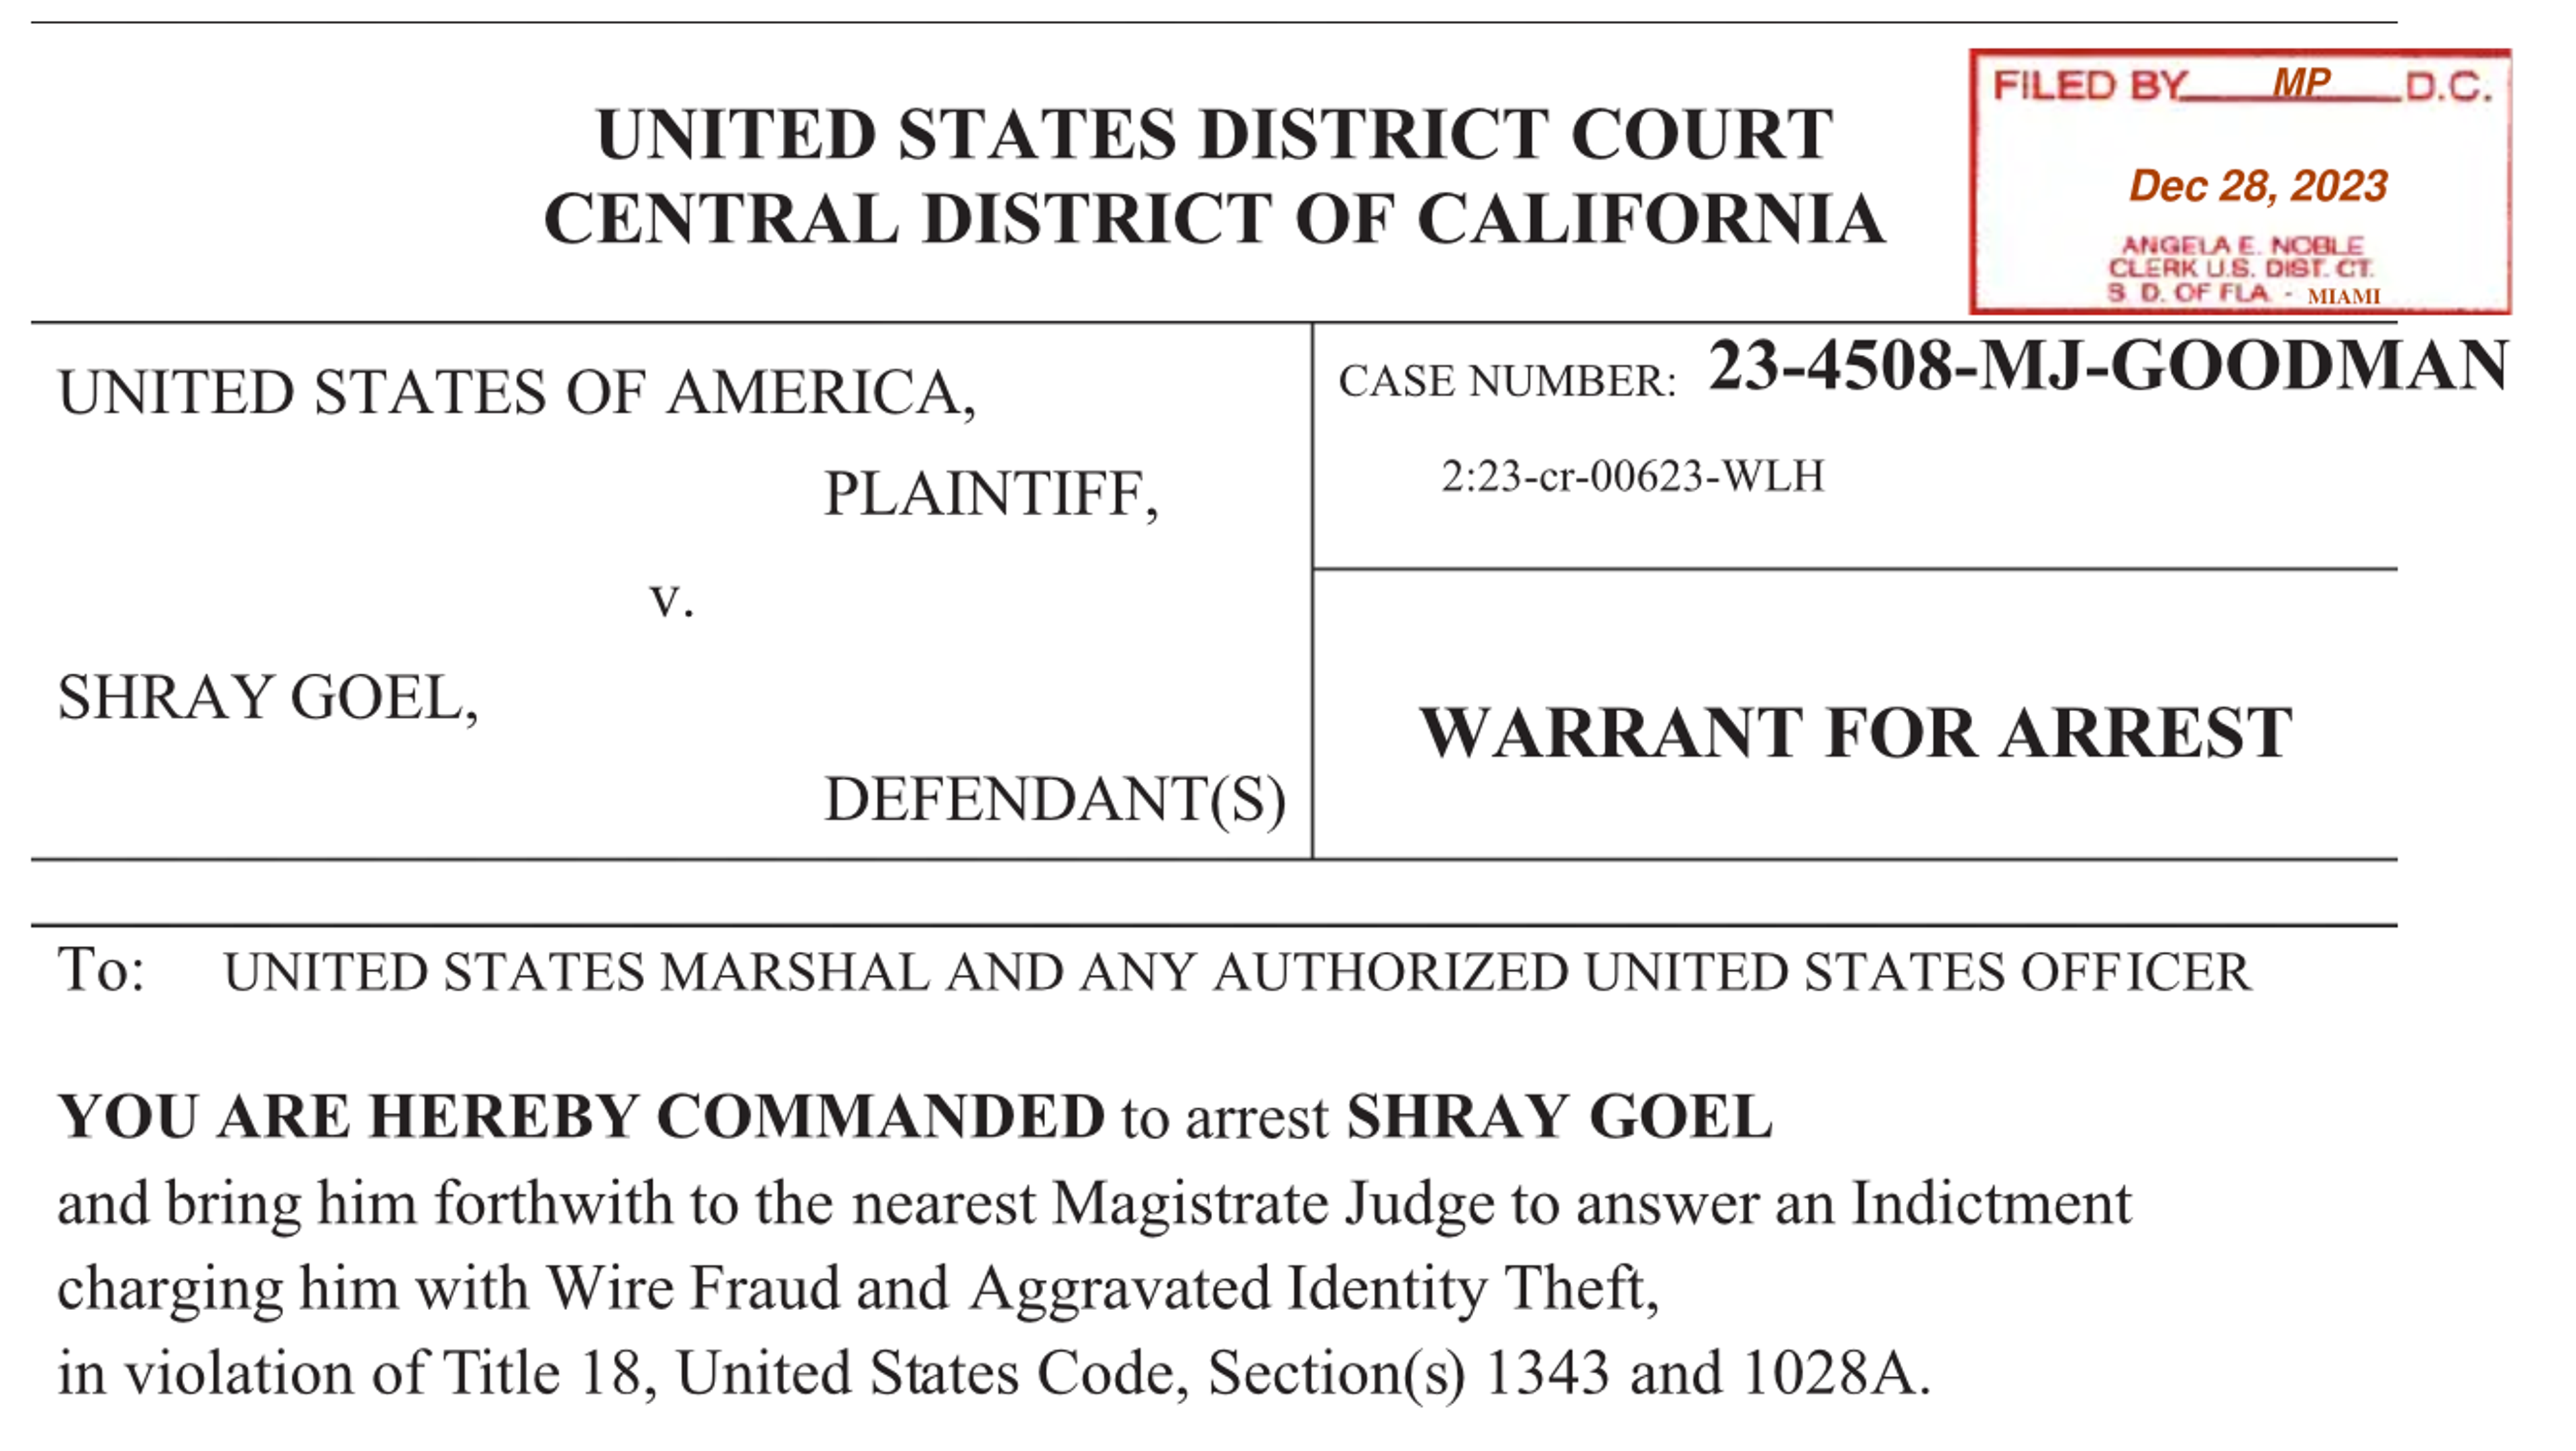 Screenshot of the warrant issued for Shray Goel's arrest in California, charging him with wire fraud and aggravated identity theft. Image uploaded to Scribd by Allie Conti.